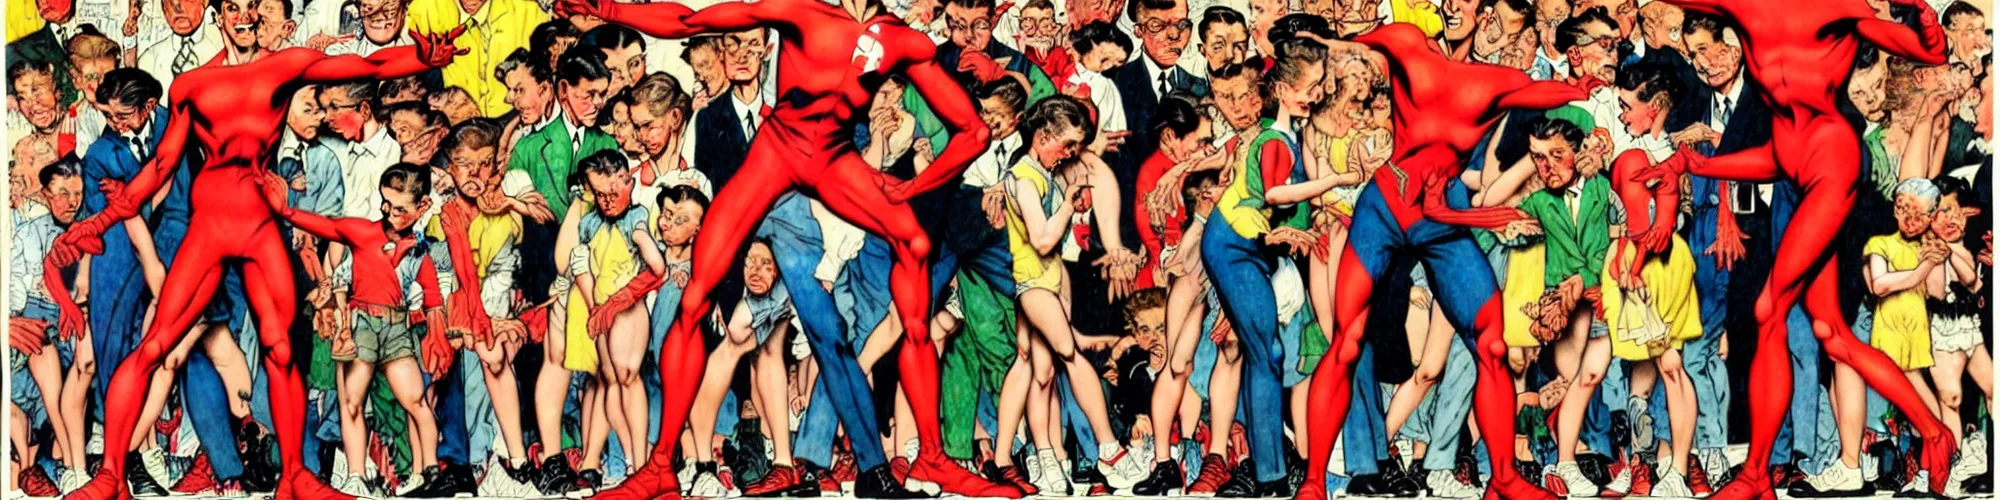 Prompt: plasticman showing off his weird limbs illustrated by norman rockwell with very long hands and arms and fingers and legs and feet twirling and twisting around at a very sunny park in a very crowded city with people looking surprised and stunned, funny, silly